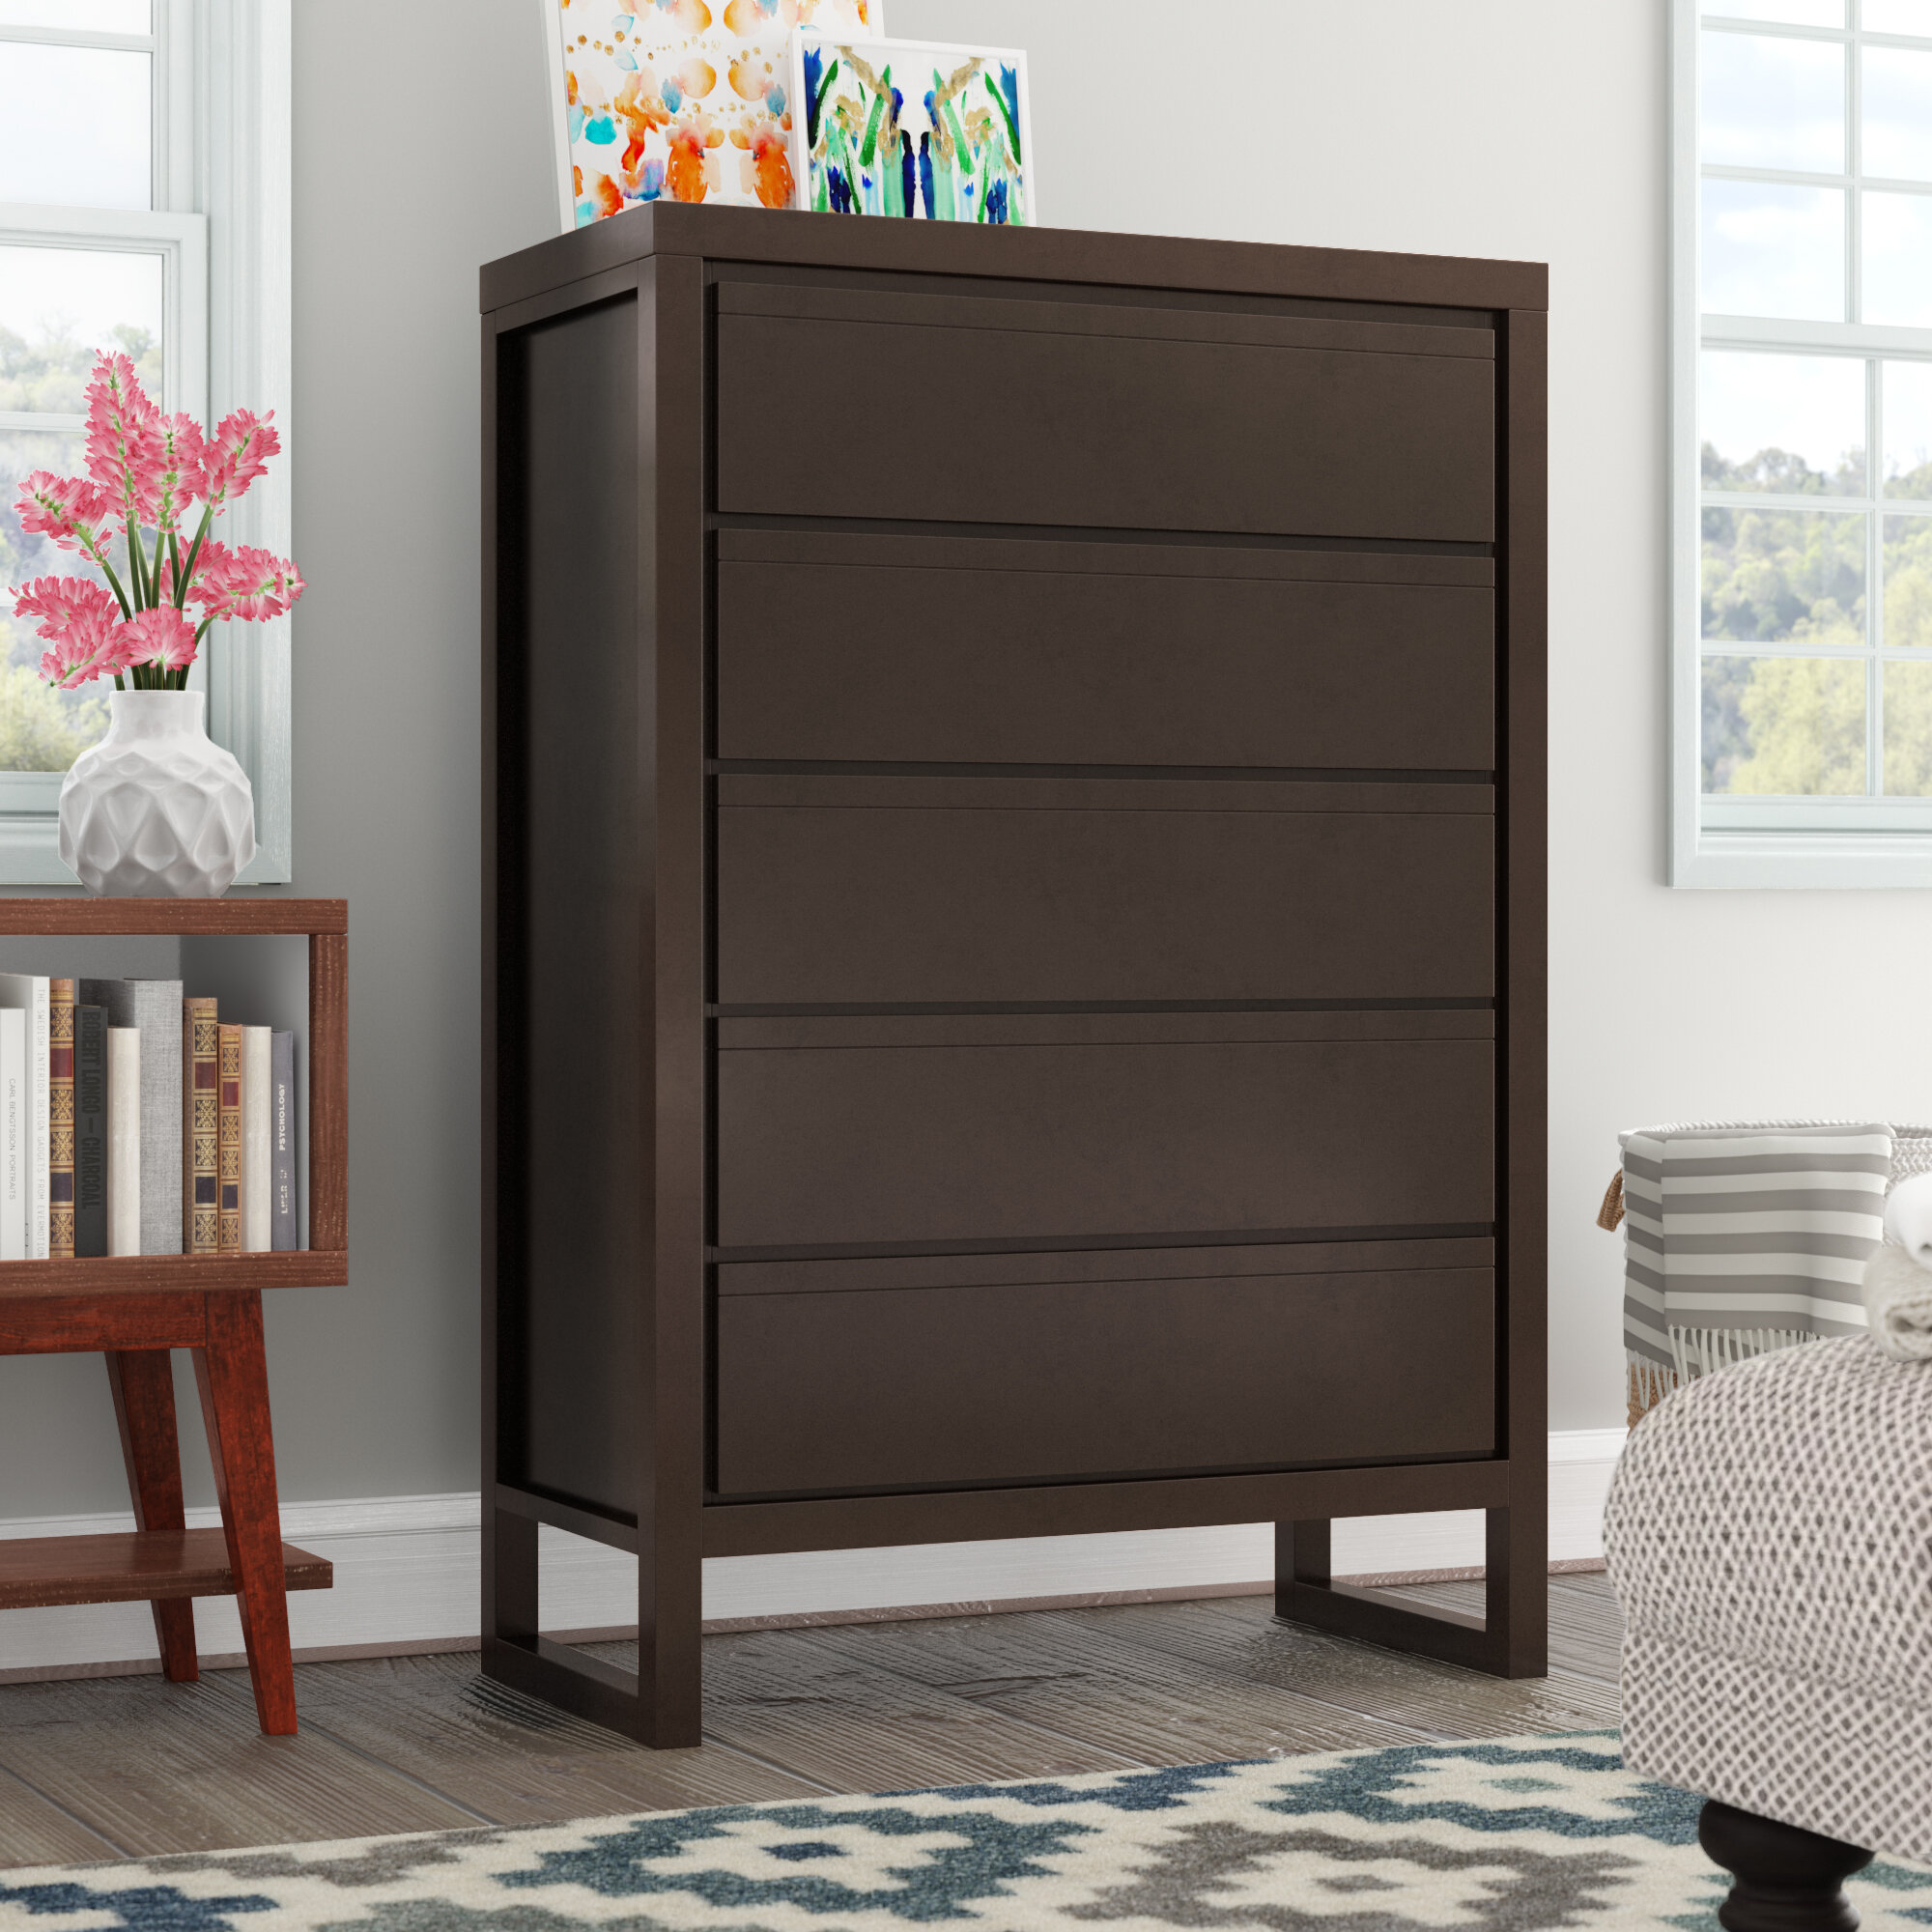 Peaceful Classics Tall Skinny Drawers for Small Spaces - Narrow Dresser  with 5 Drawer Storage Organizer - Amish Furniture Cabinet for Bathrooms